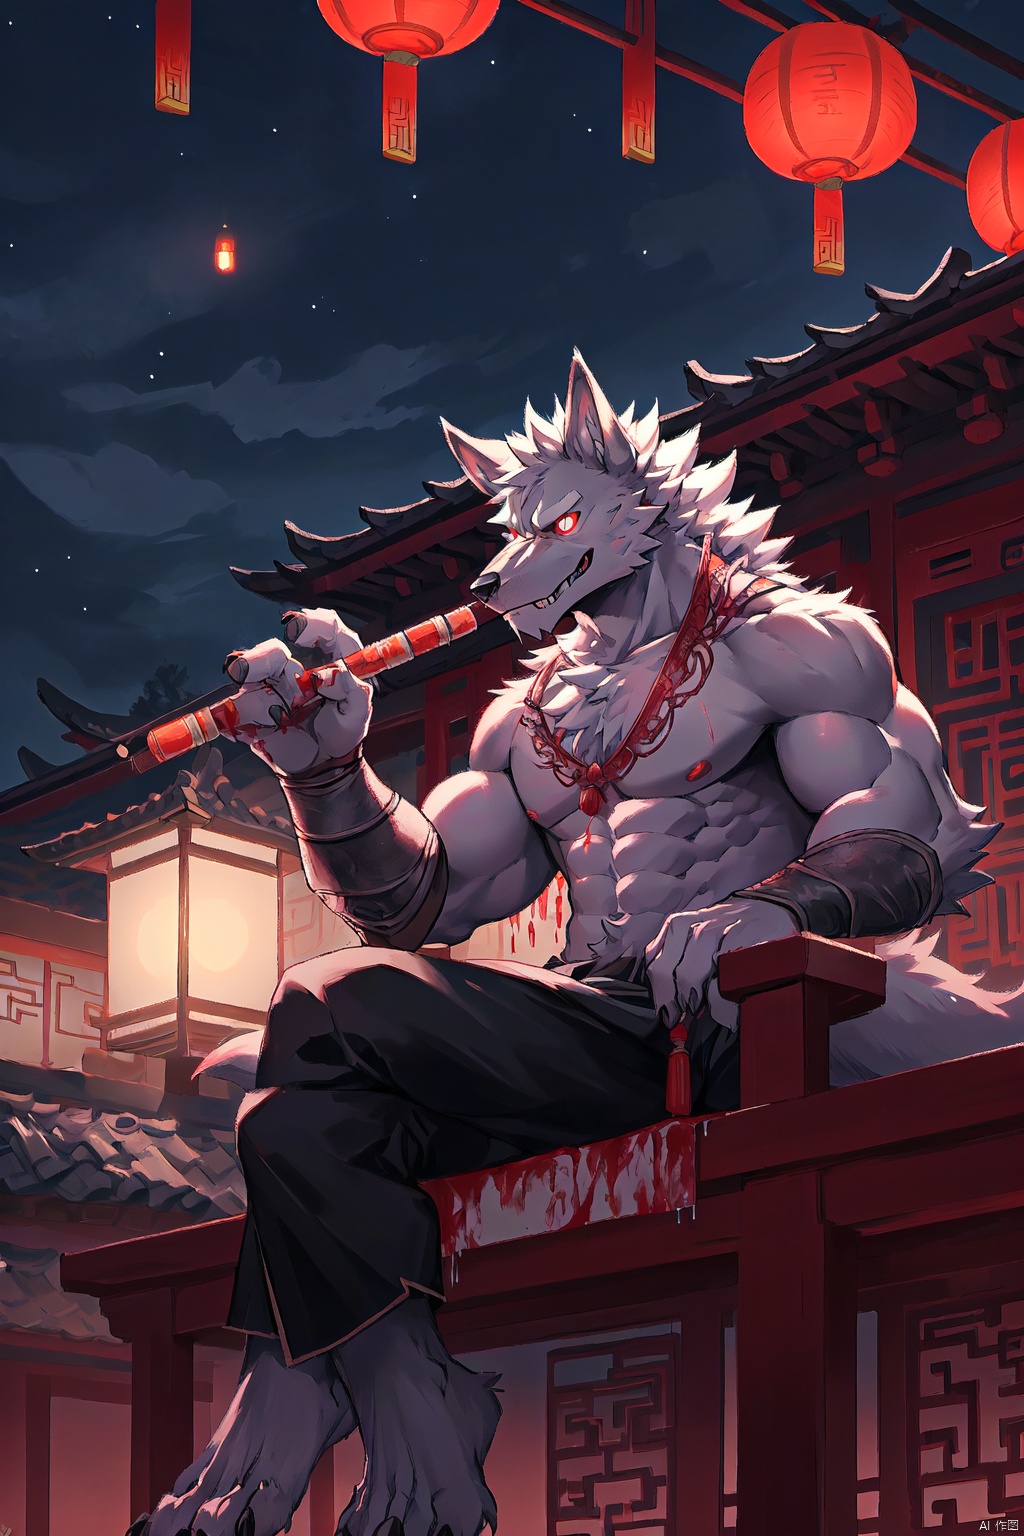 furry white werewolf blood pupil elegant temperament muscular black knight customer service Sitting on the roof at night playing the flute The house is an ancient Chinese style building There are many Kongming lanterns in the sky, furry